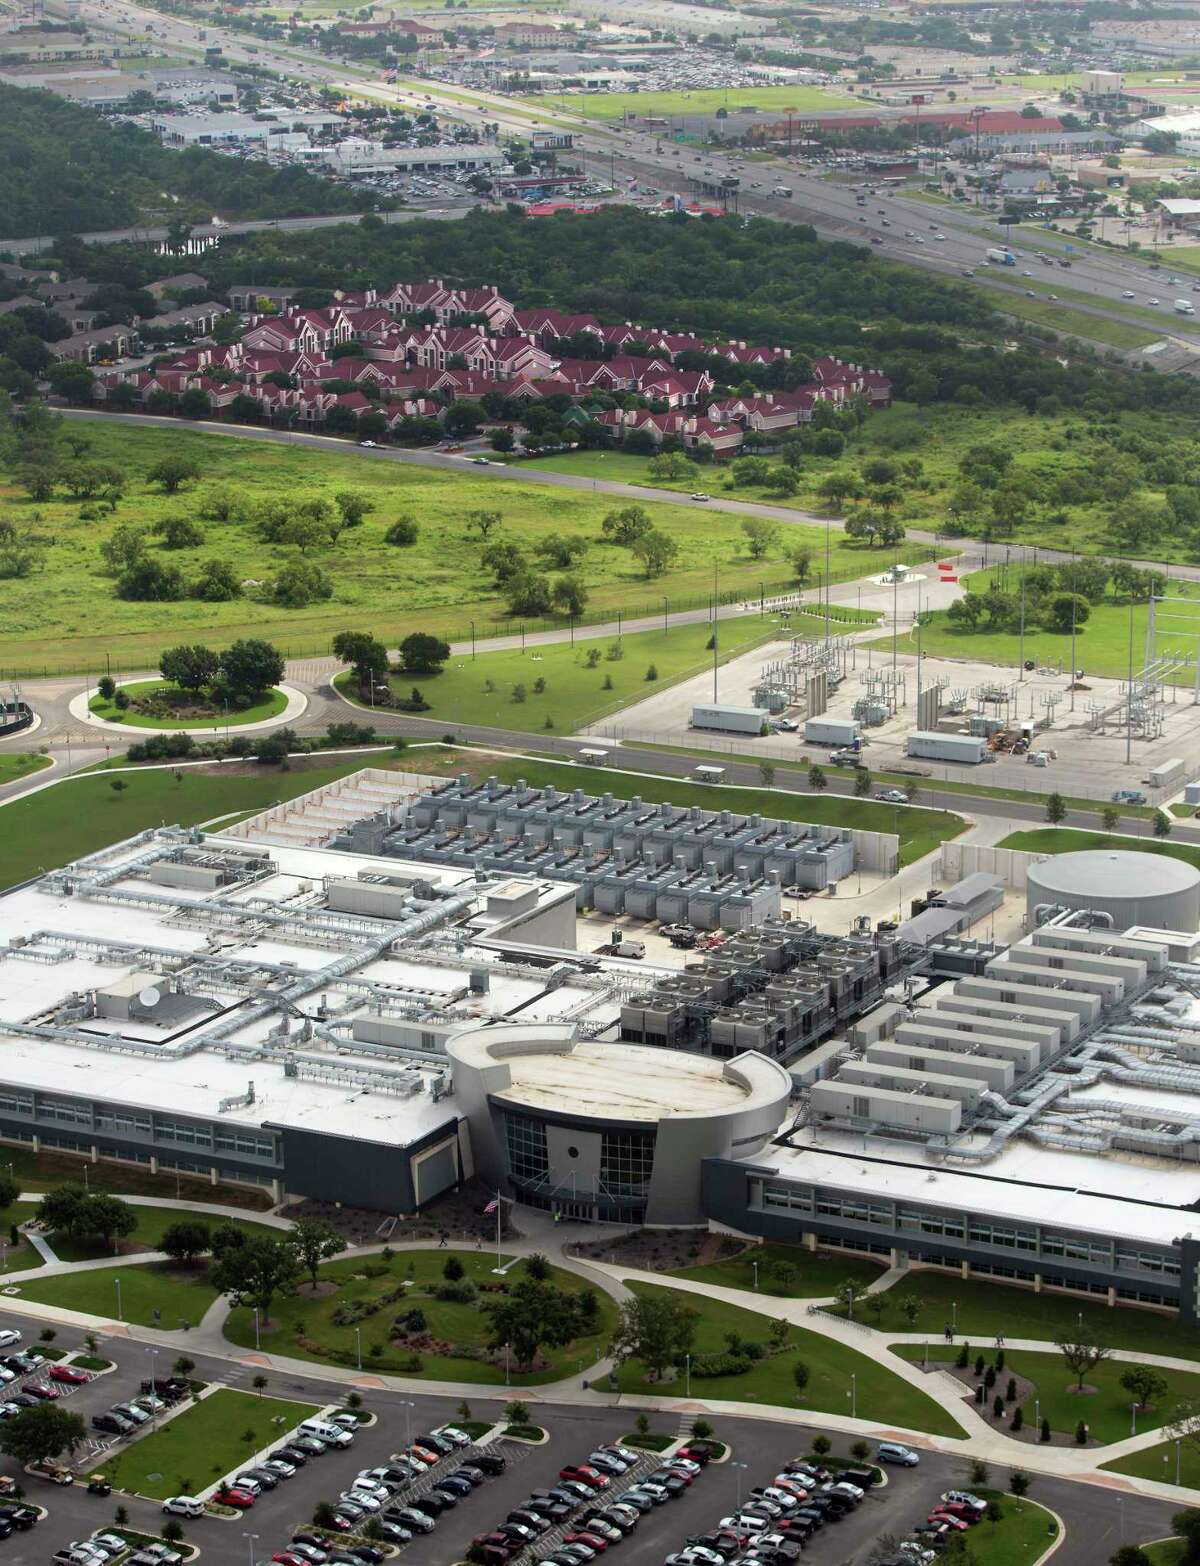 The National Security Agency building in San Antonio is seen in this 2013 aerial photo. Thought it’s said little about its operations before, some of the wraps are coming off as it seeks to staff up amid growing cybersecurity threats.